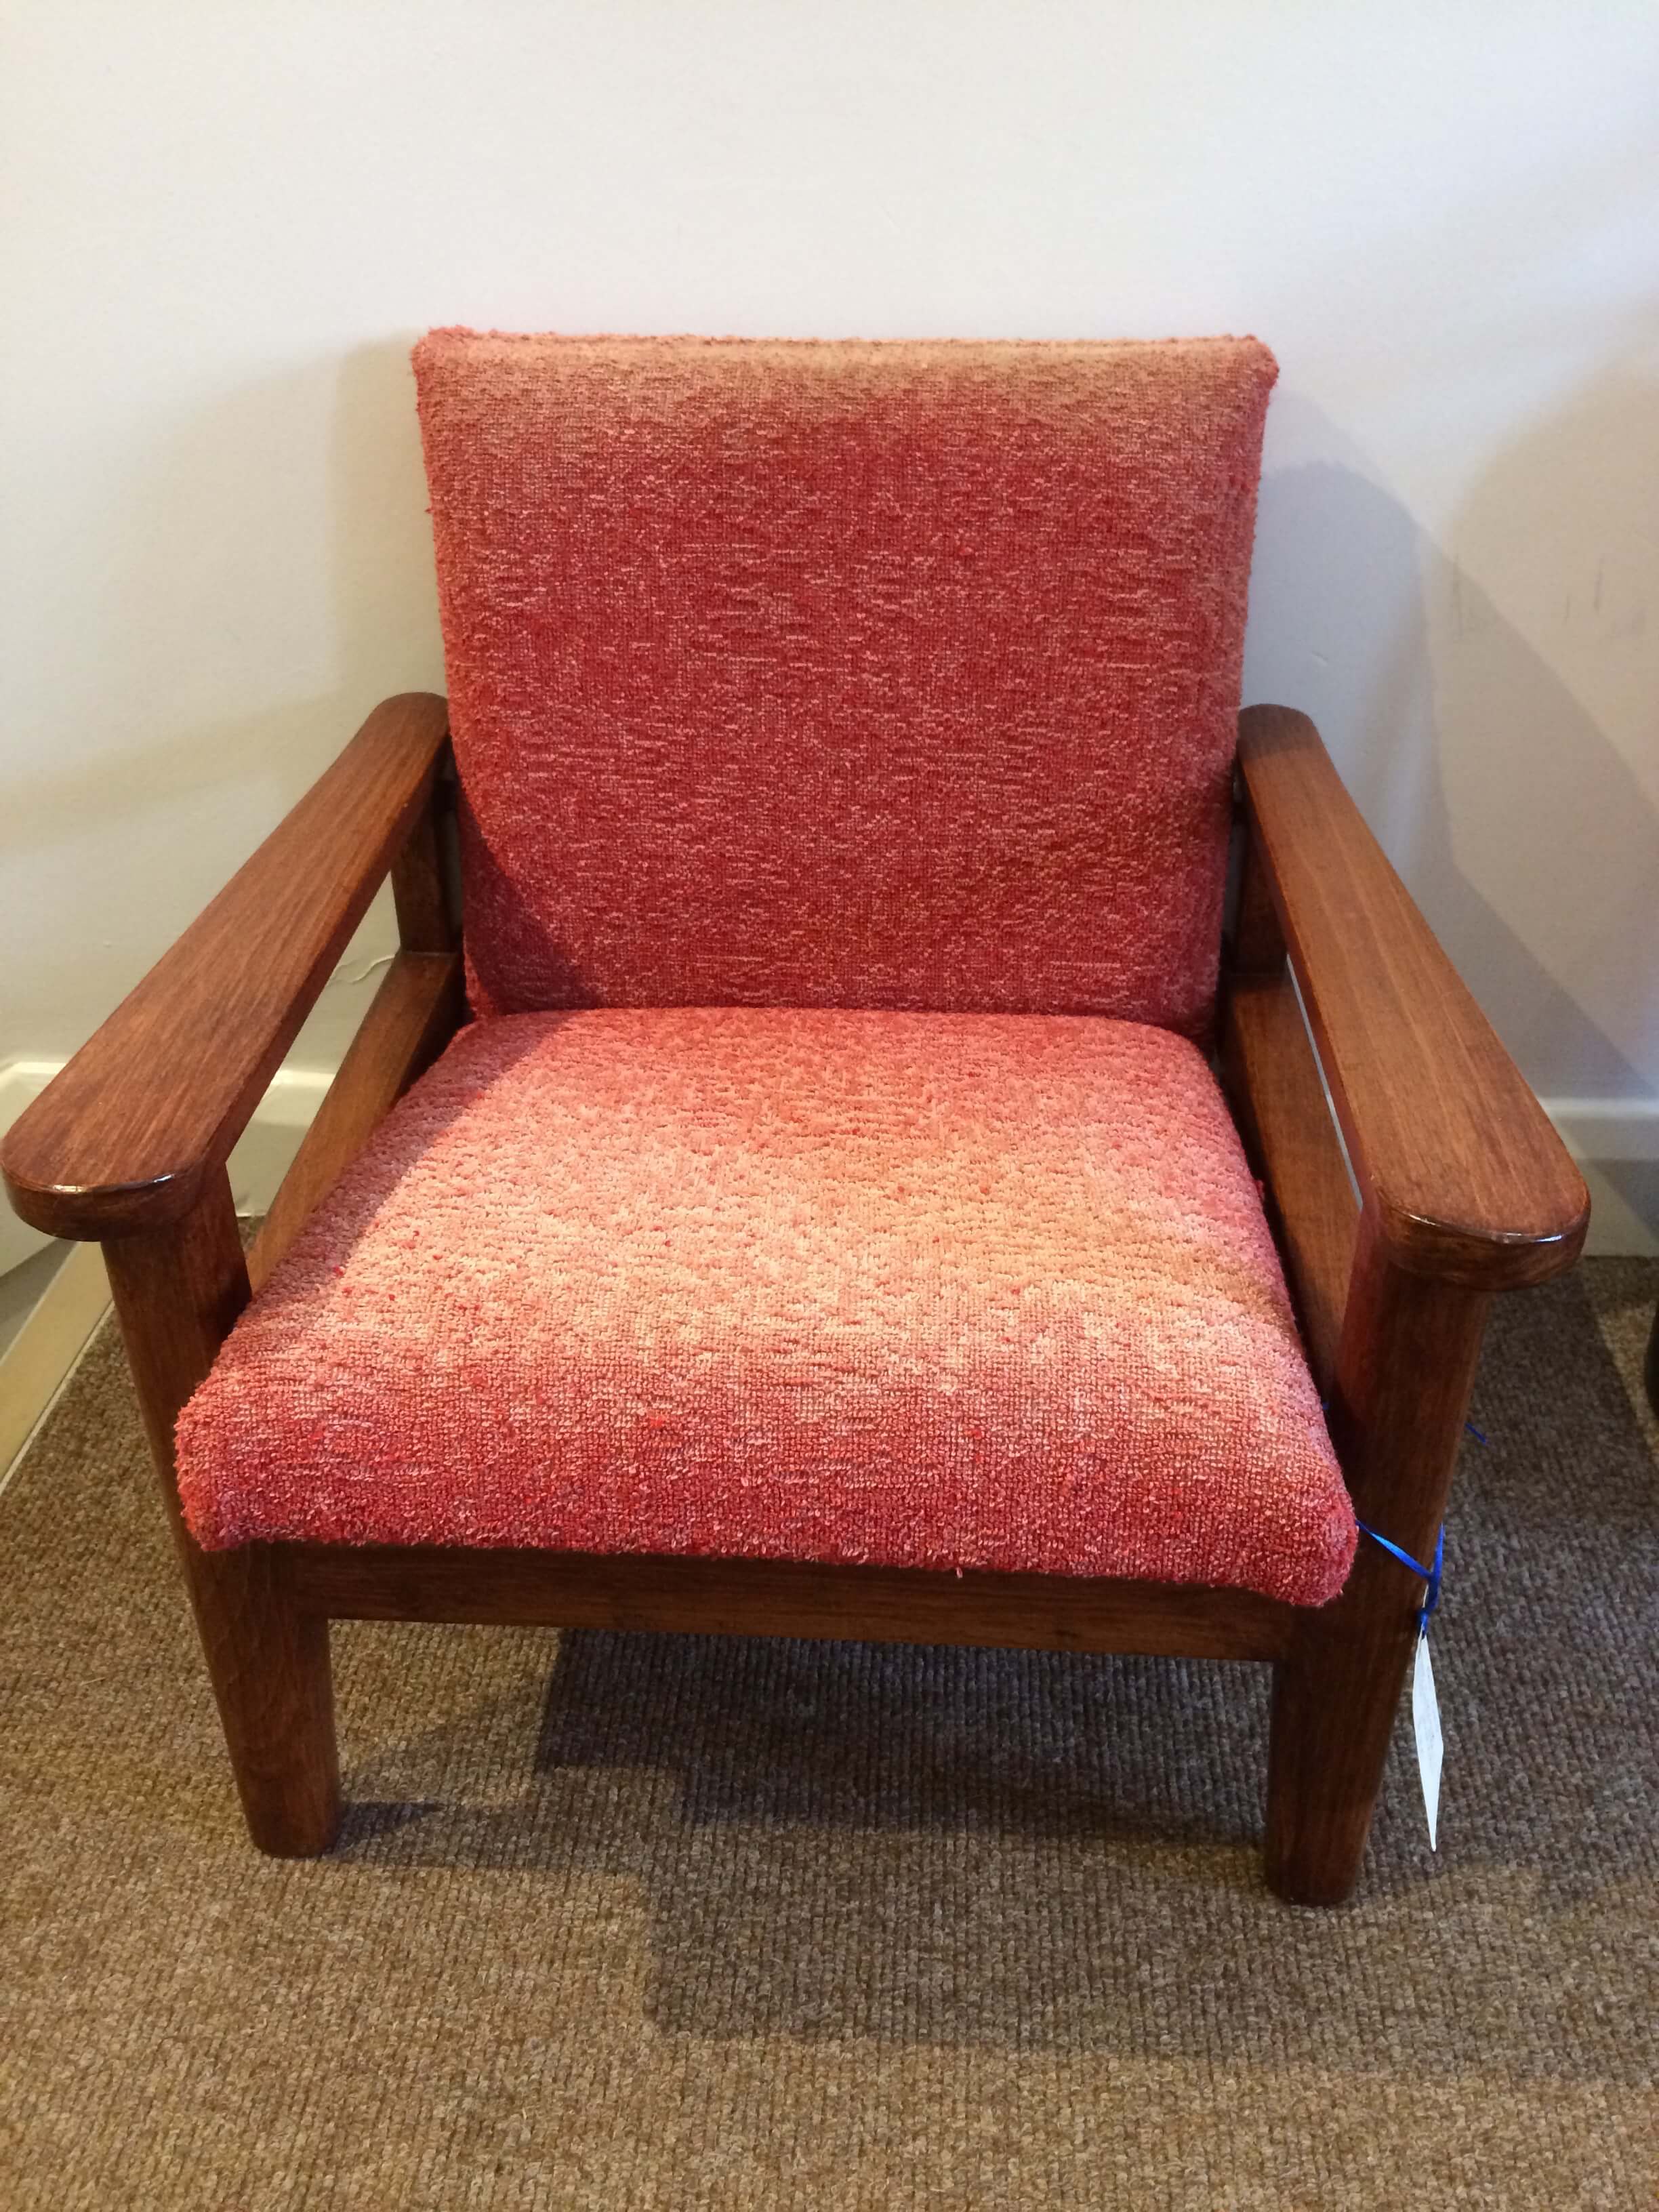 Parker-Knoll-Child's-Chair